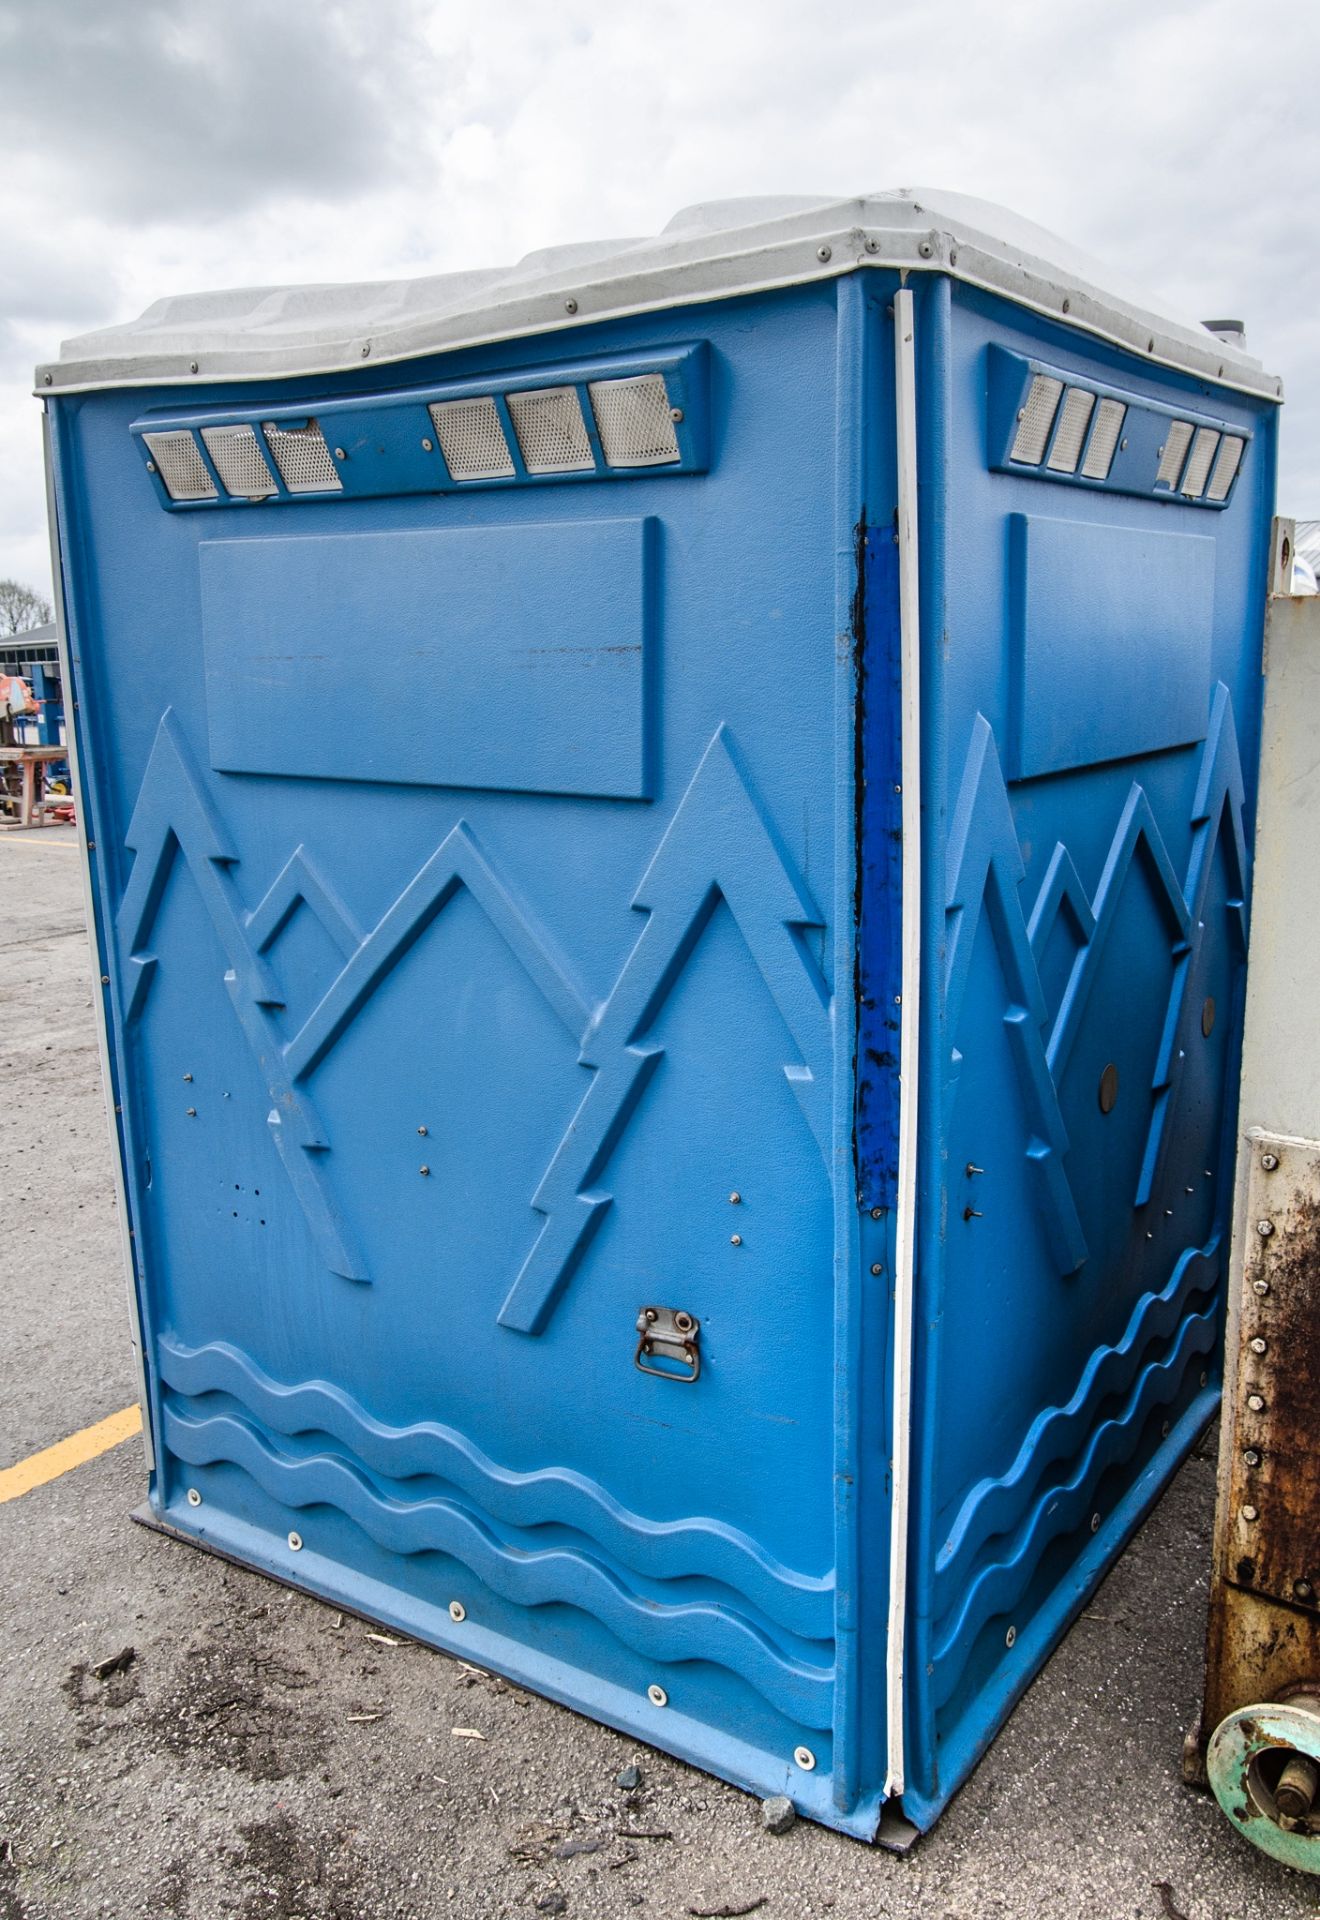 Disabled portable toilet 22087022 - Image 2 of 3